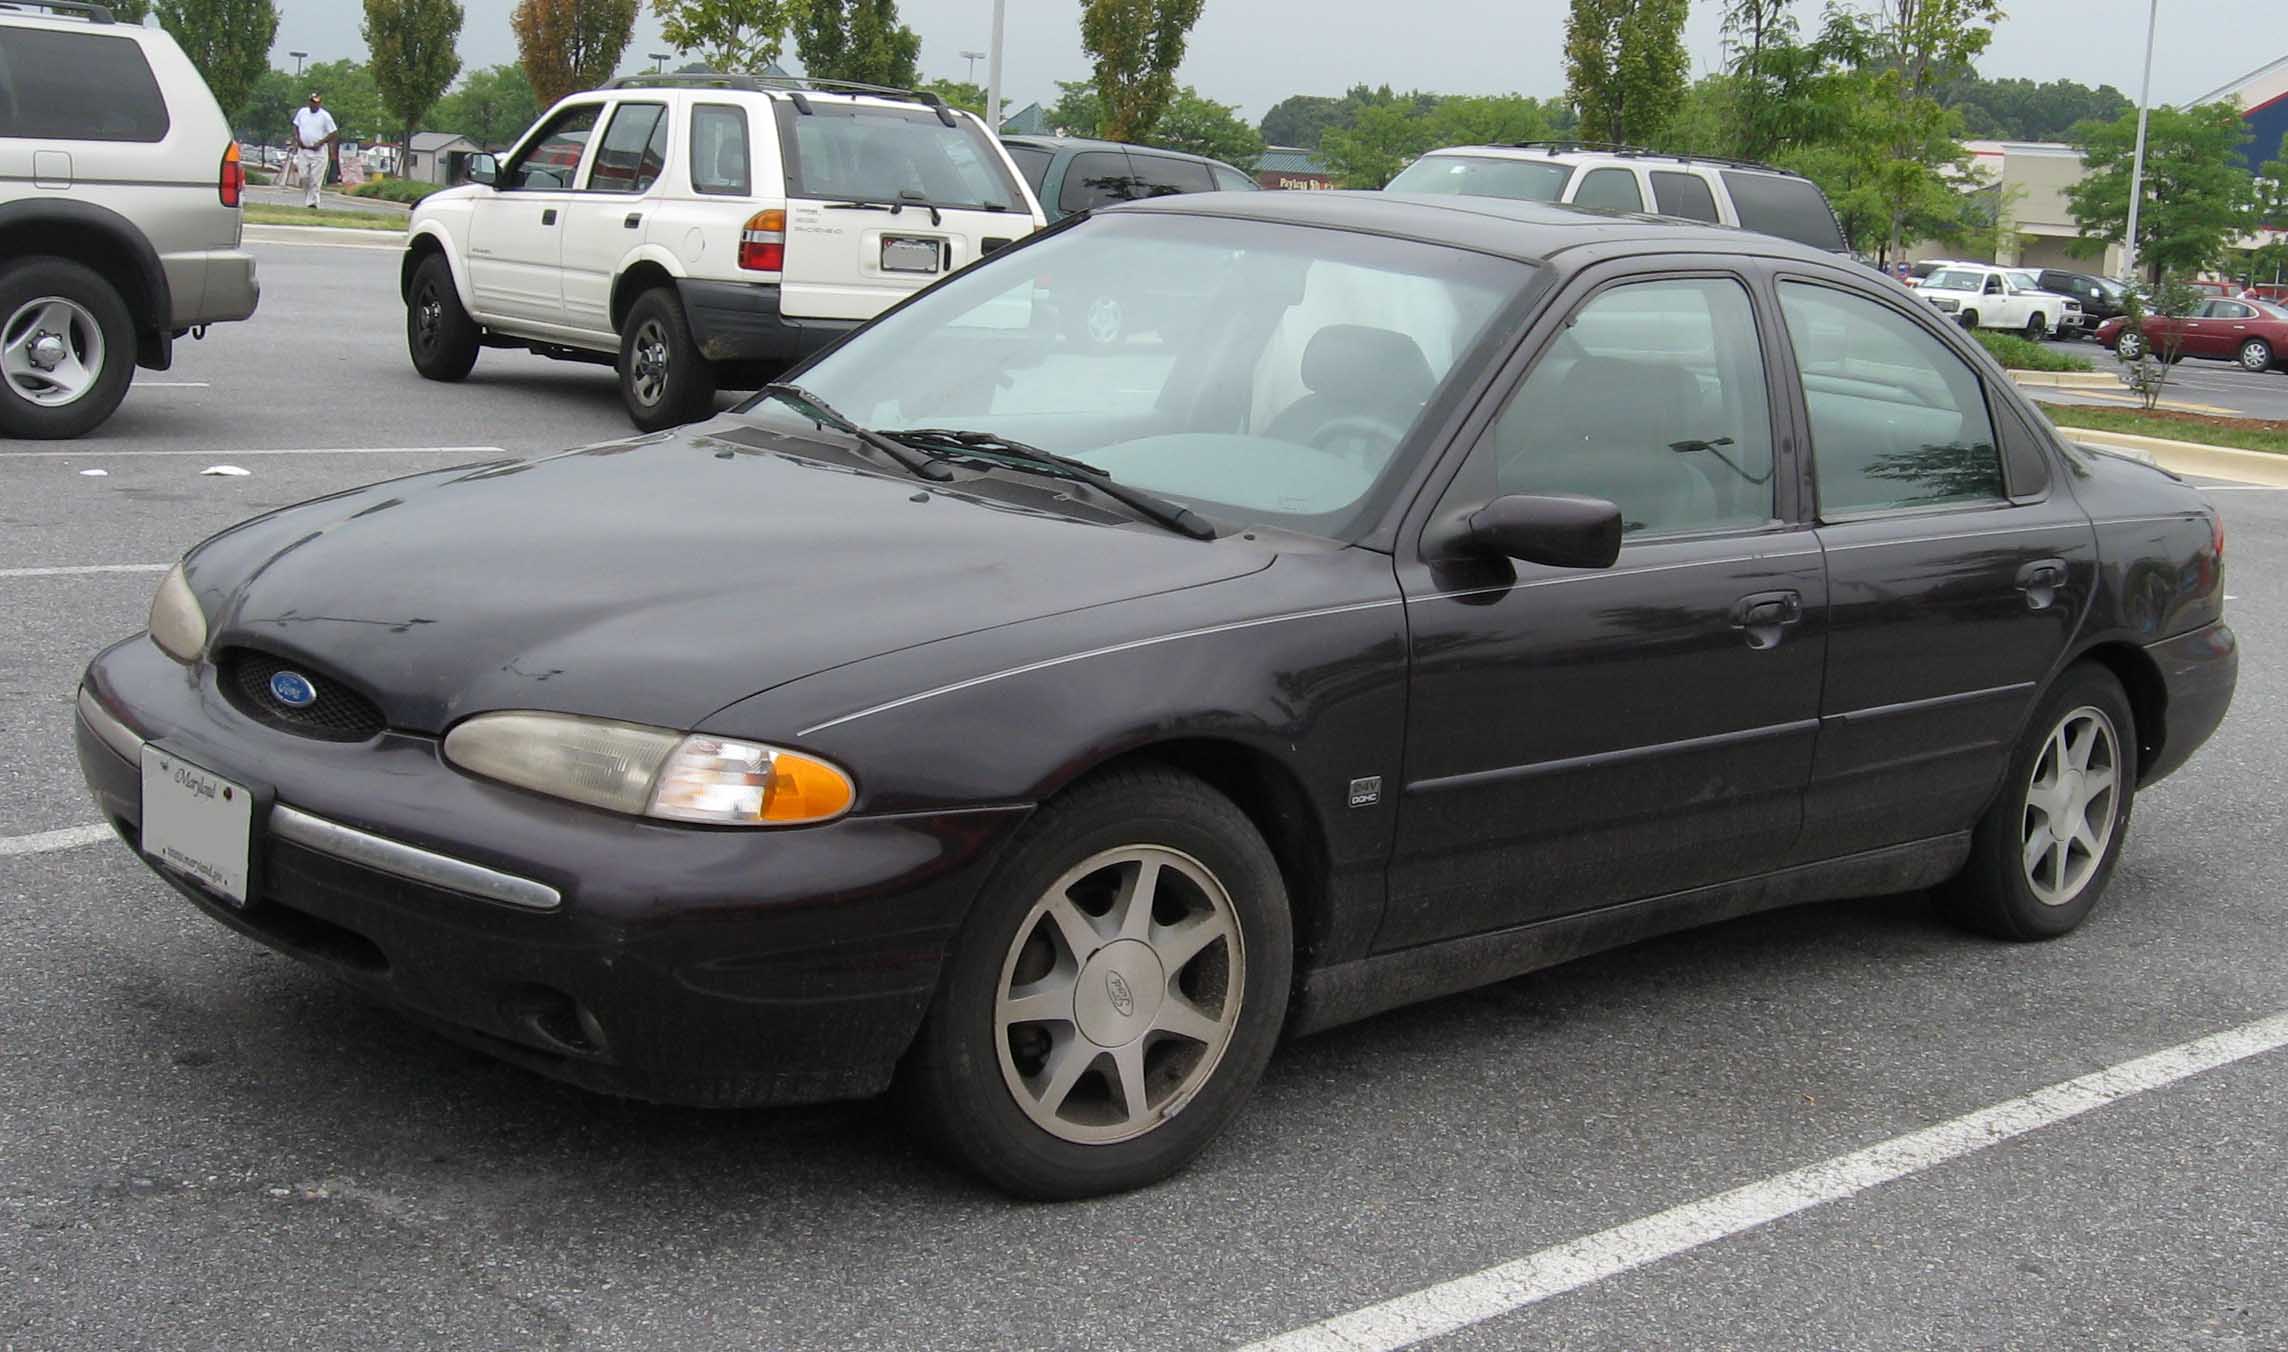 File:1995-Ford-Contour.jpg - Wikimedia Commons